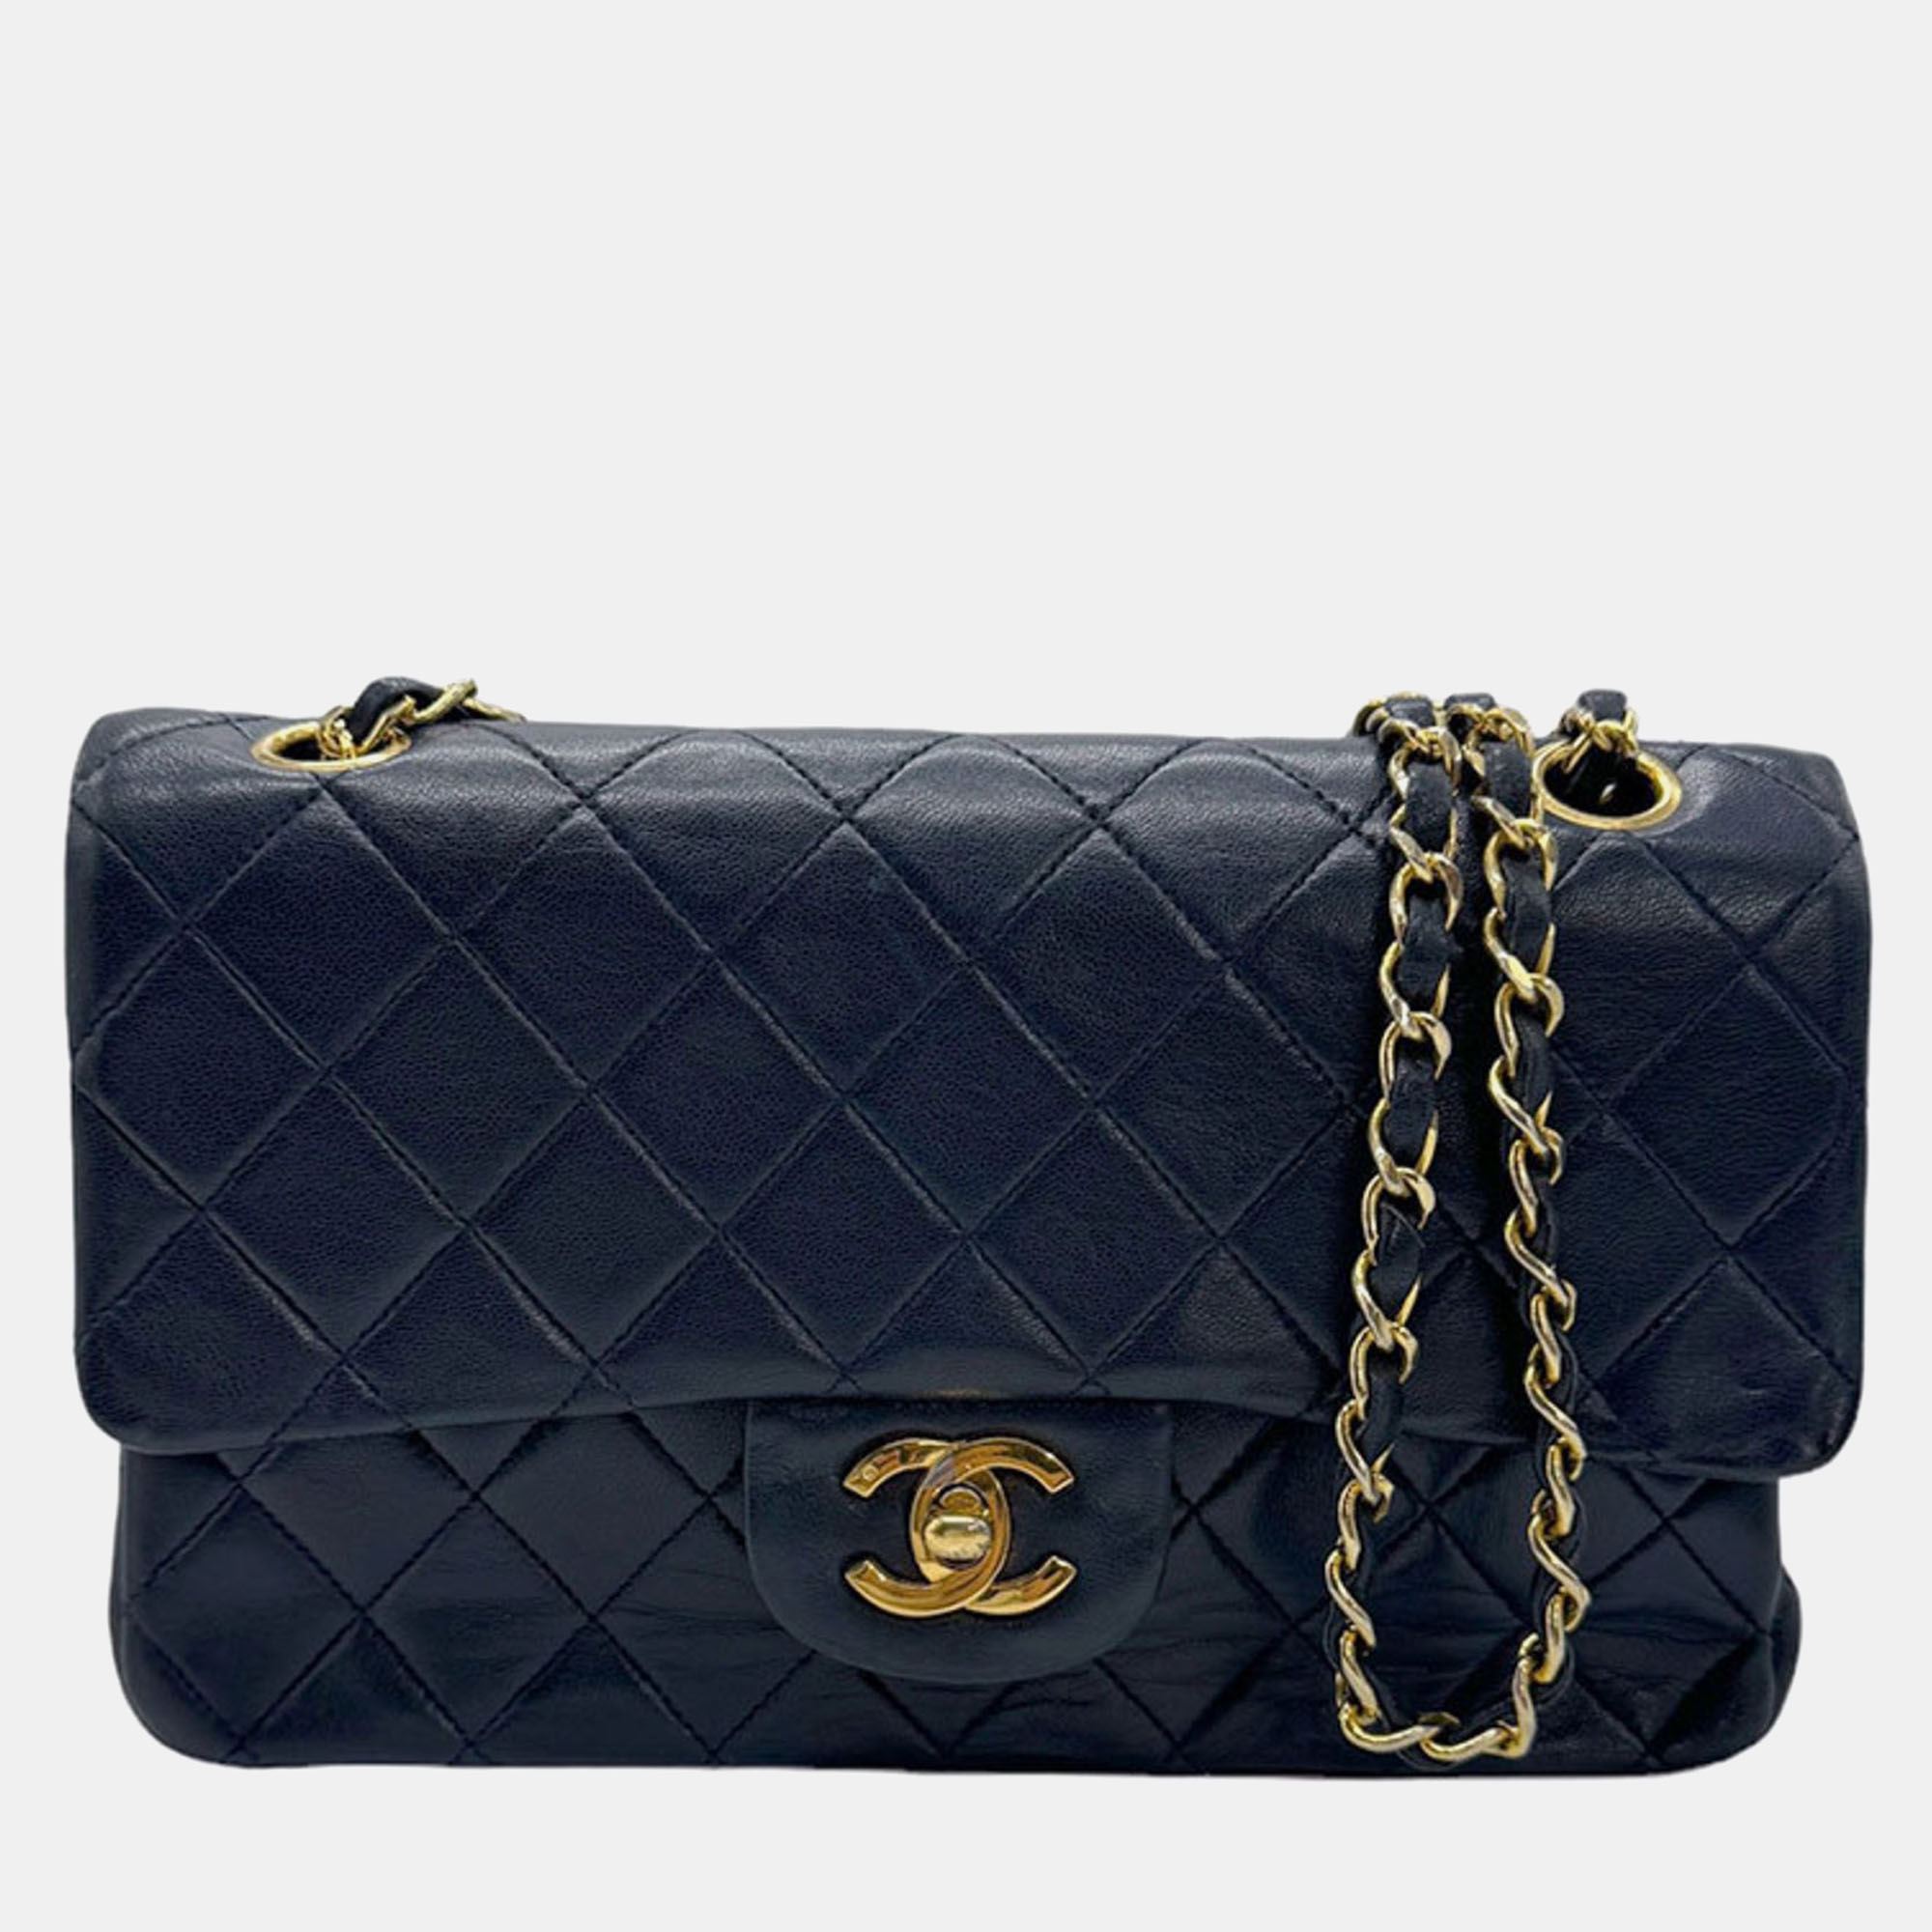 Chanel navy leather classic medium double flap bag